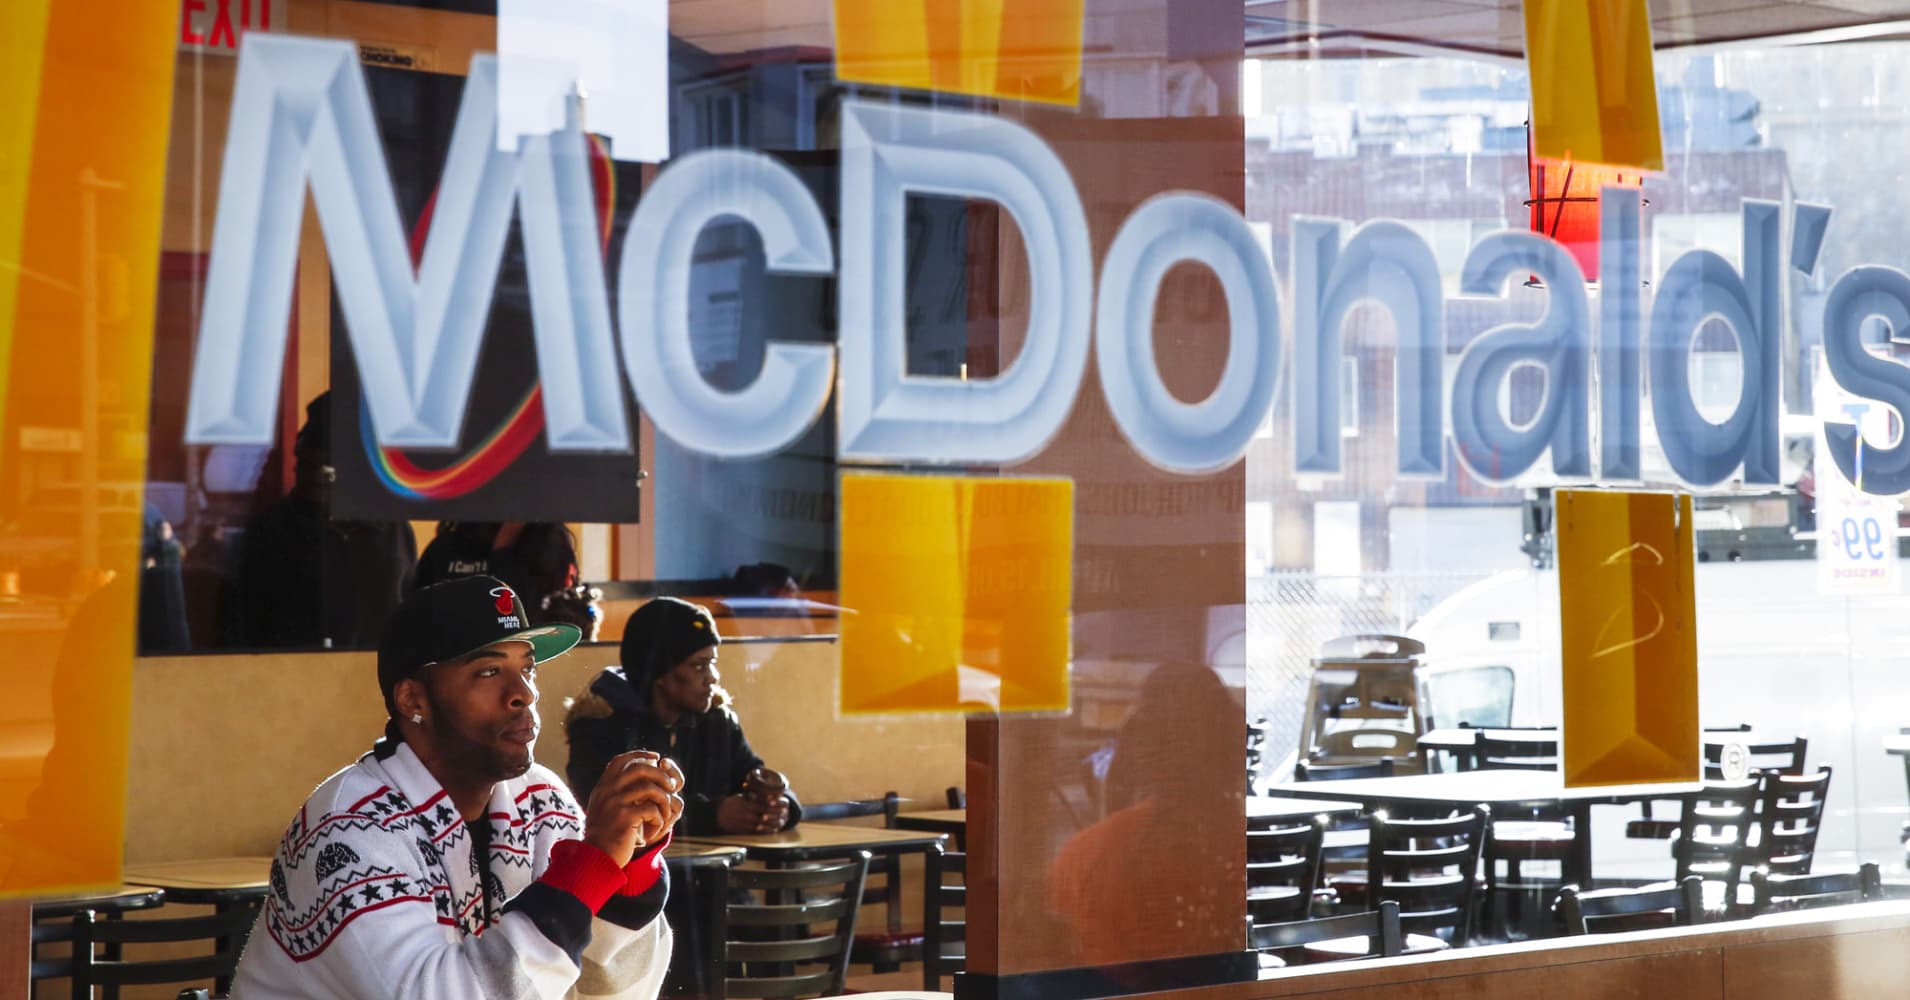 McDonald's franchisees foresee modest sales gain in third quarter - CNBC